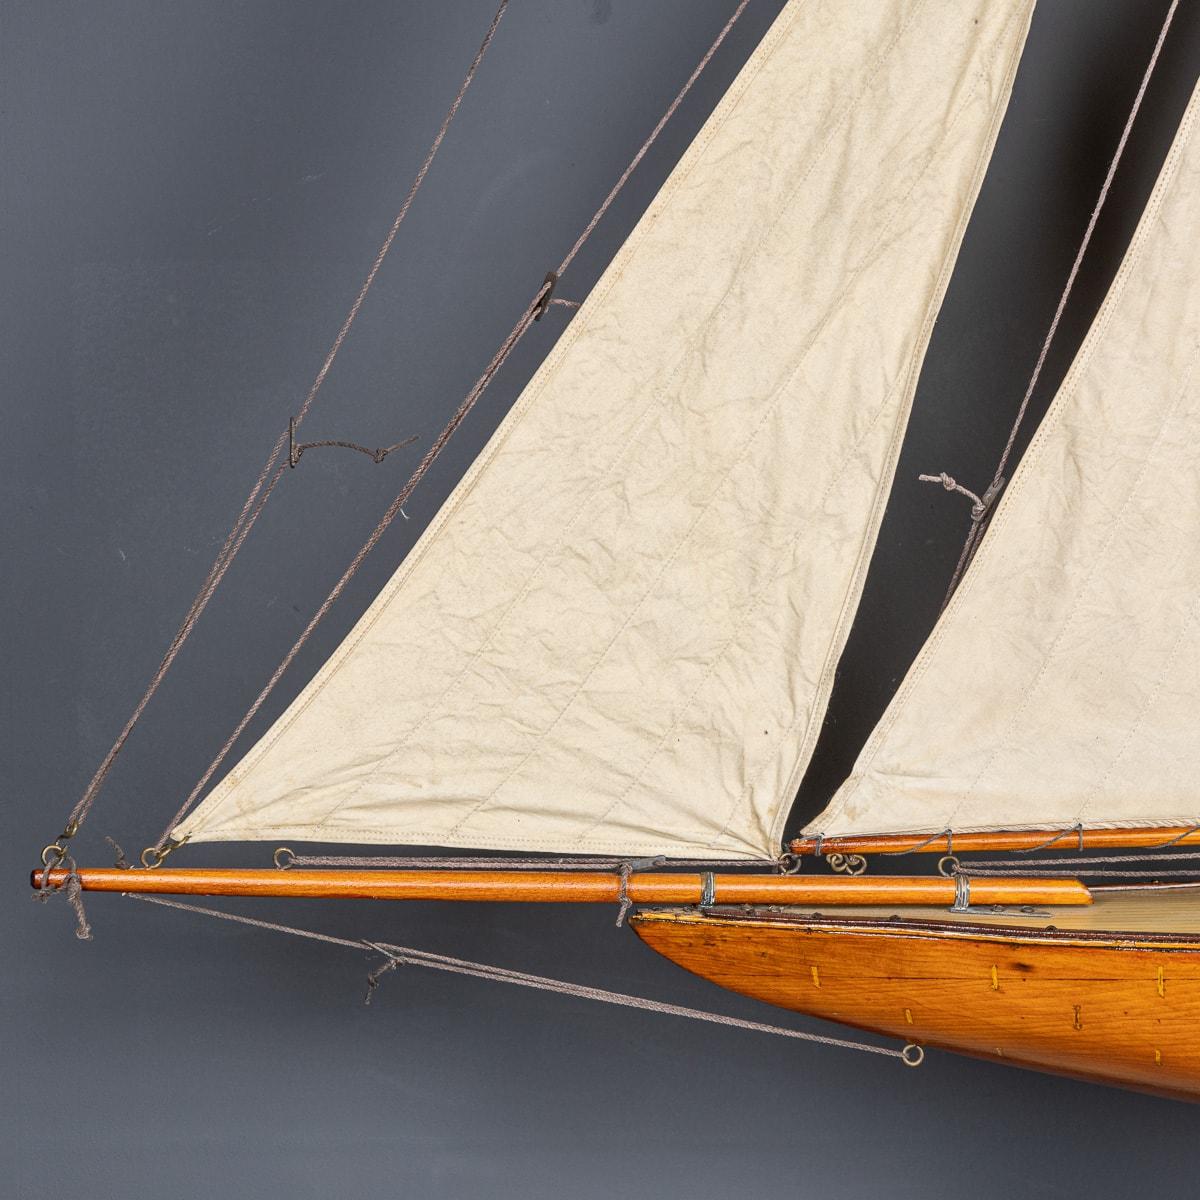 20th Century Large English Made Wooden Pond Yacht c.1930 For Sale 7